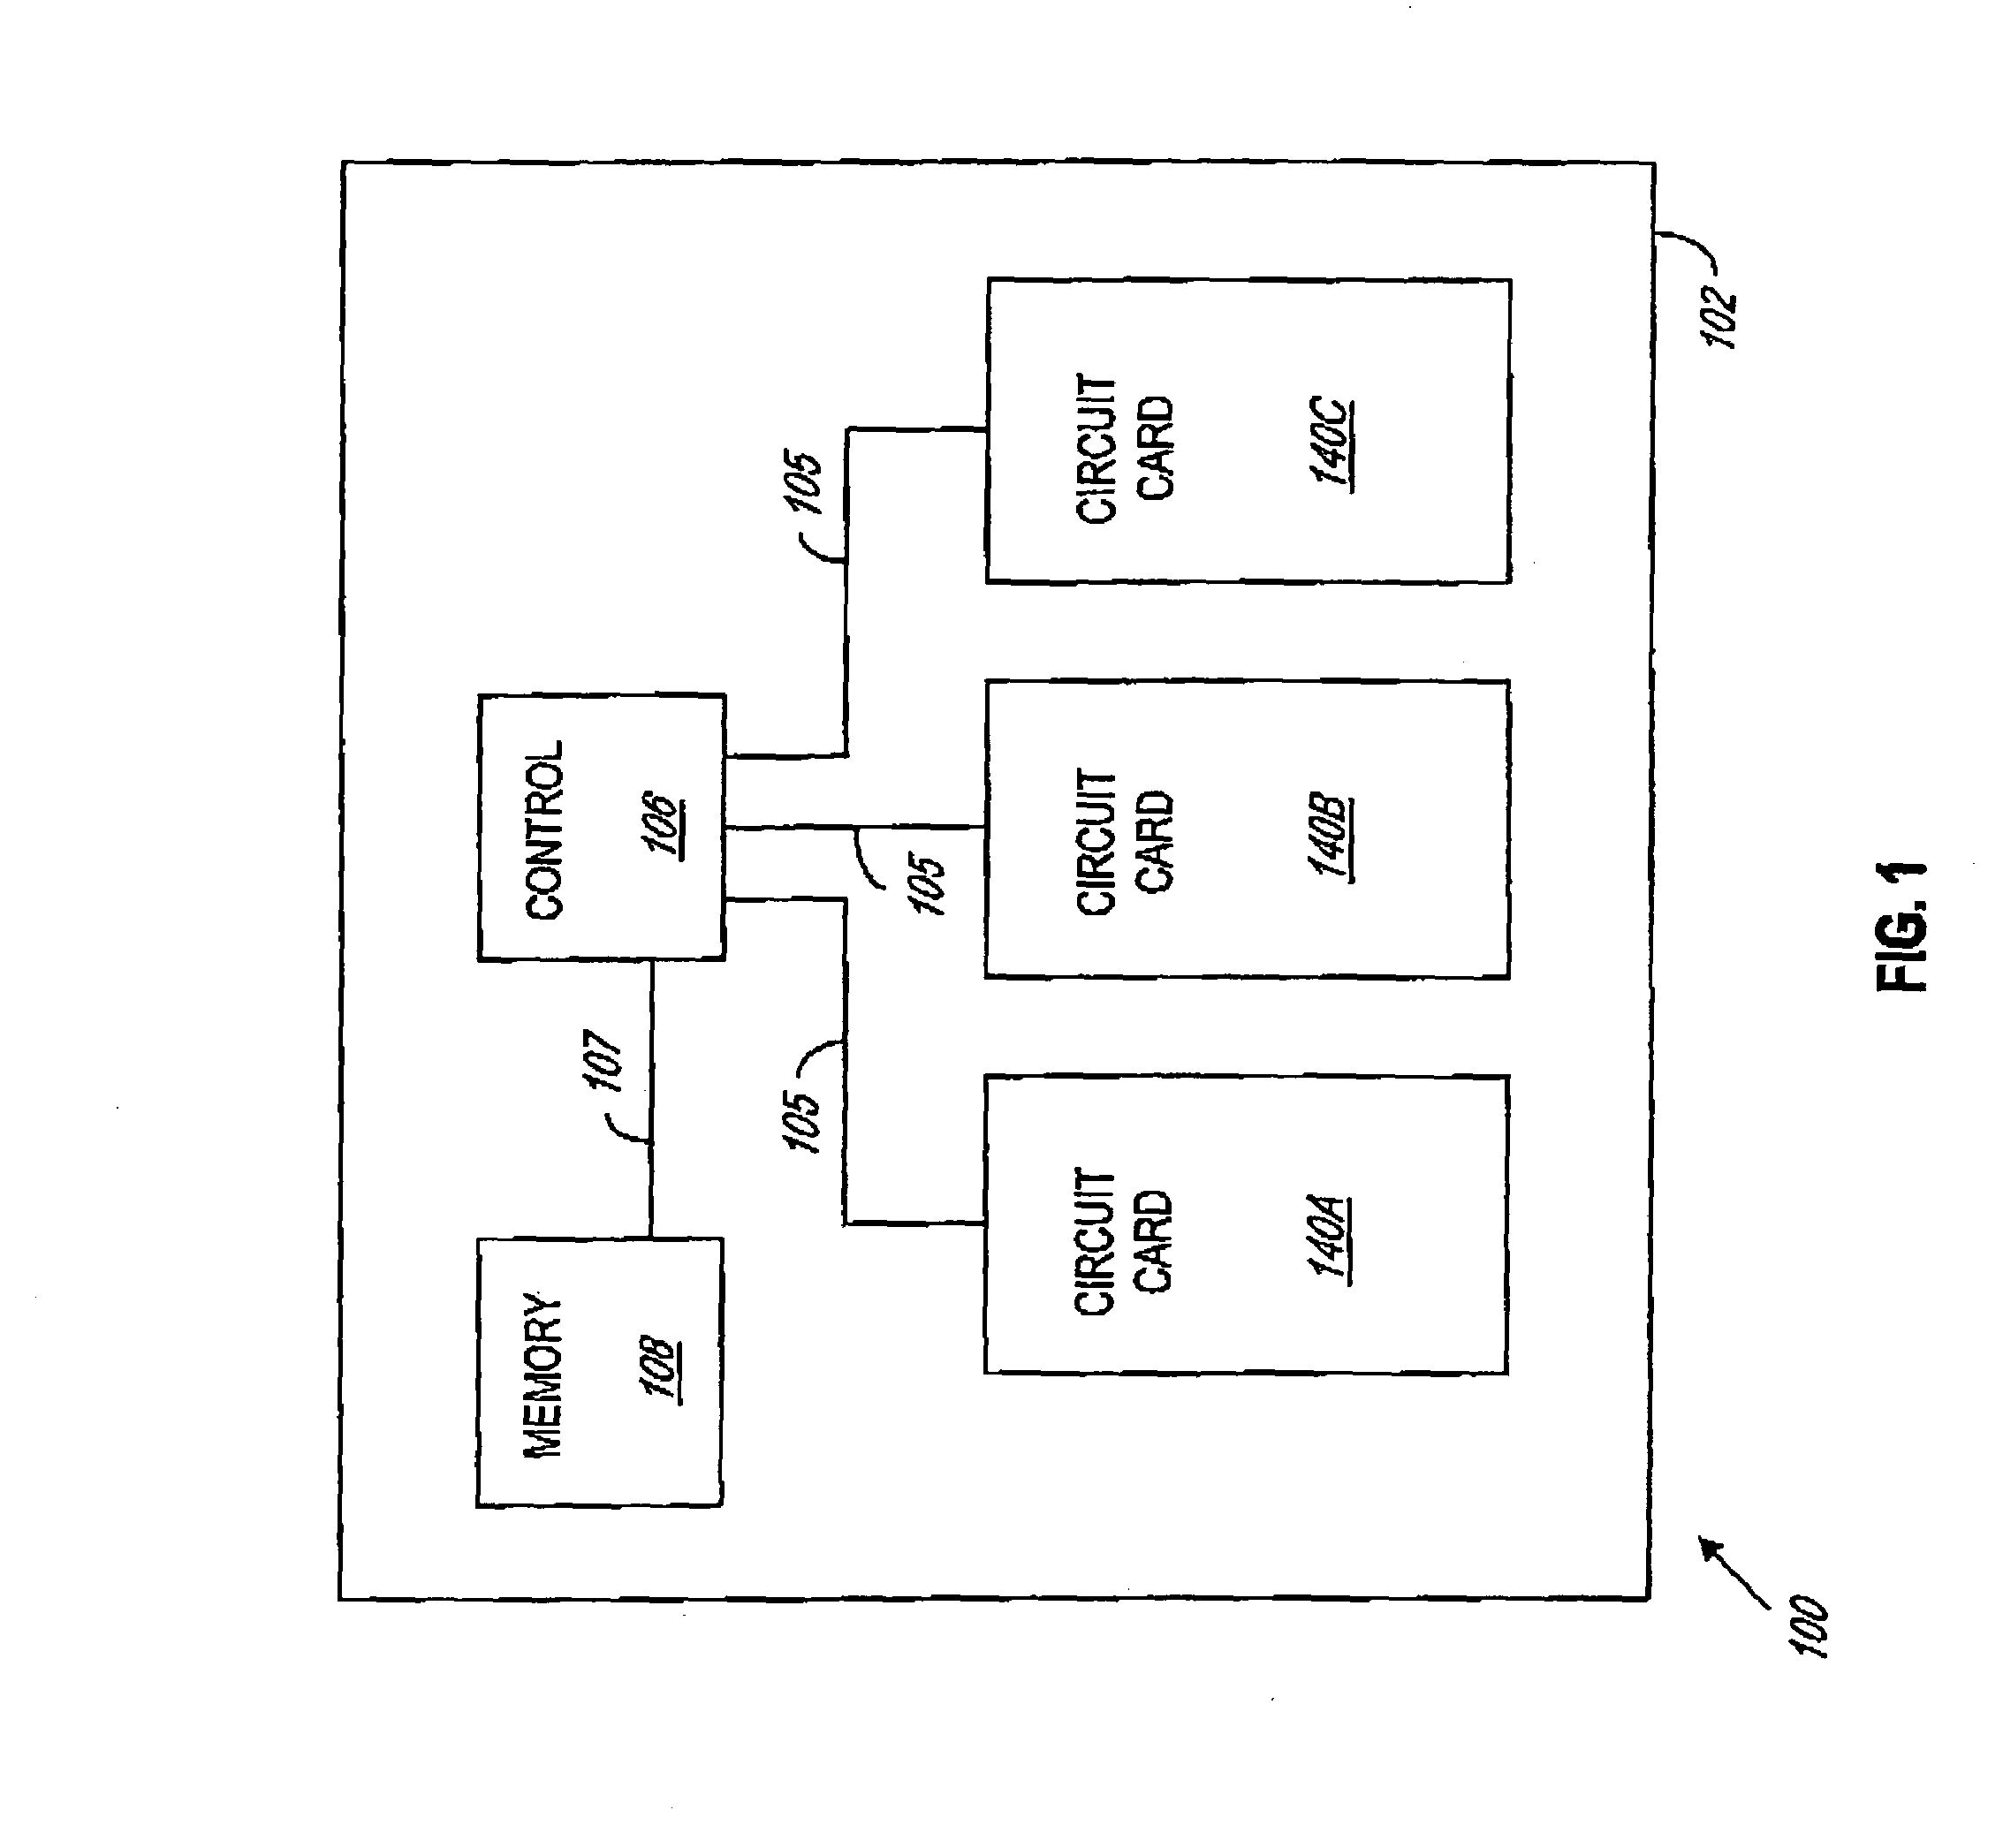 System and method for tracking utilization data for an electronic device